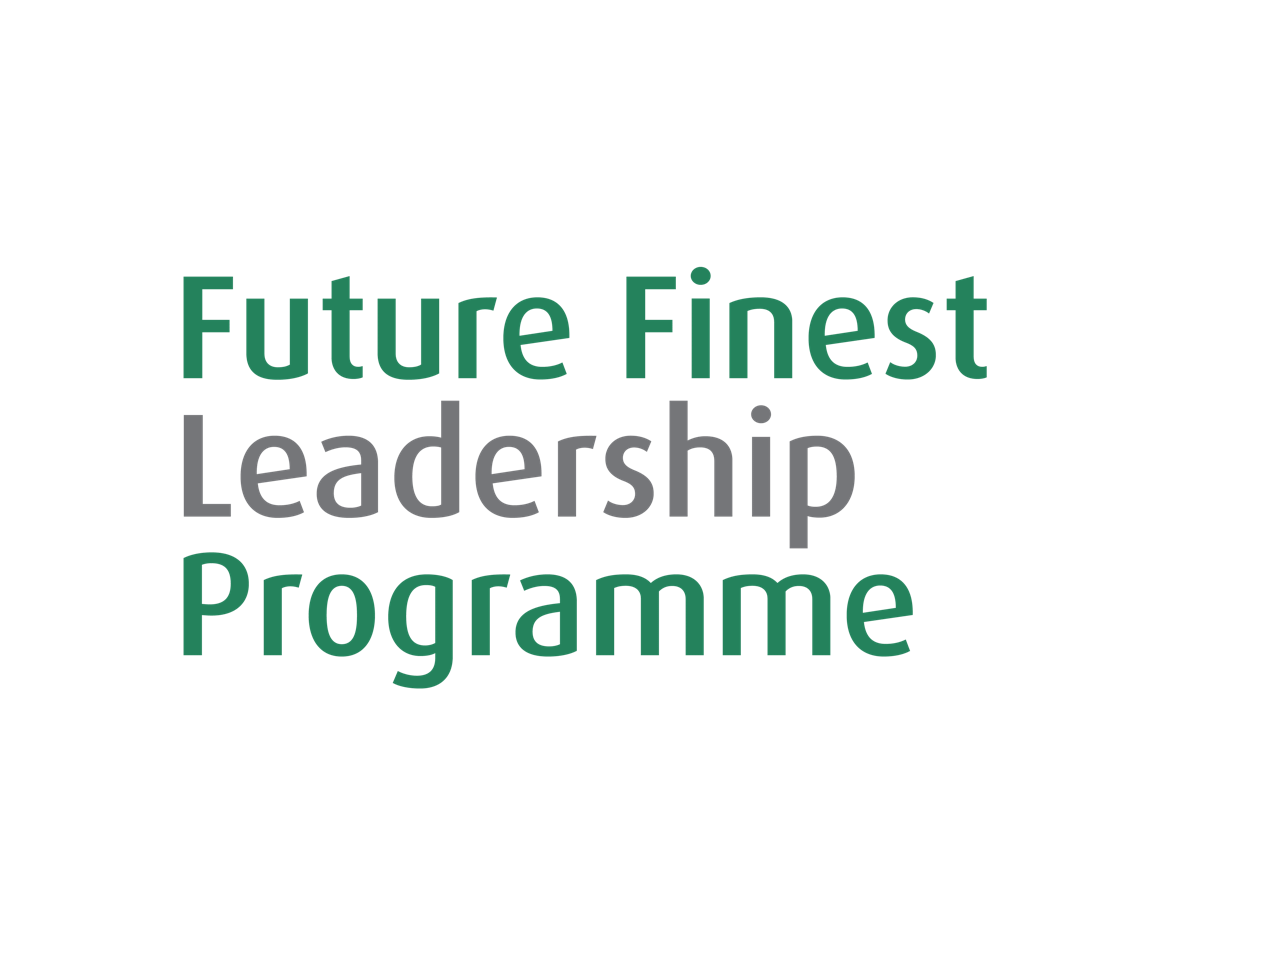 Future Finest Leadership Training for new managers in accountancy firms